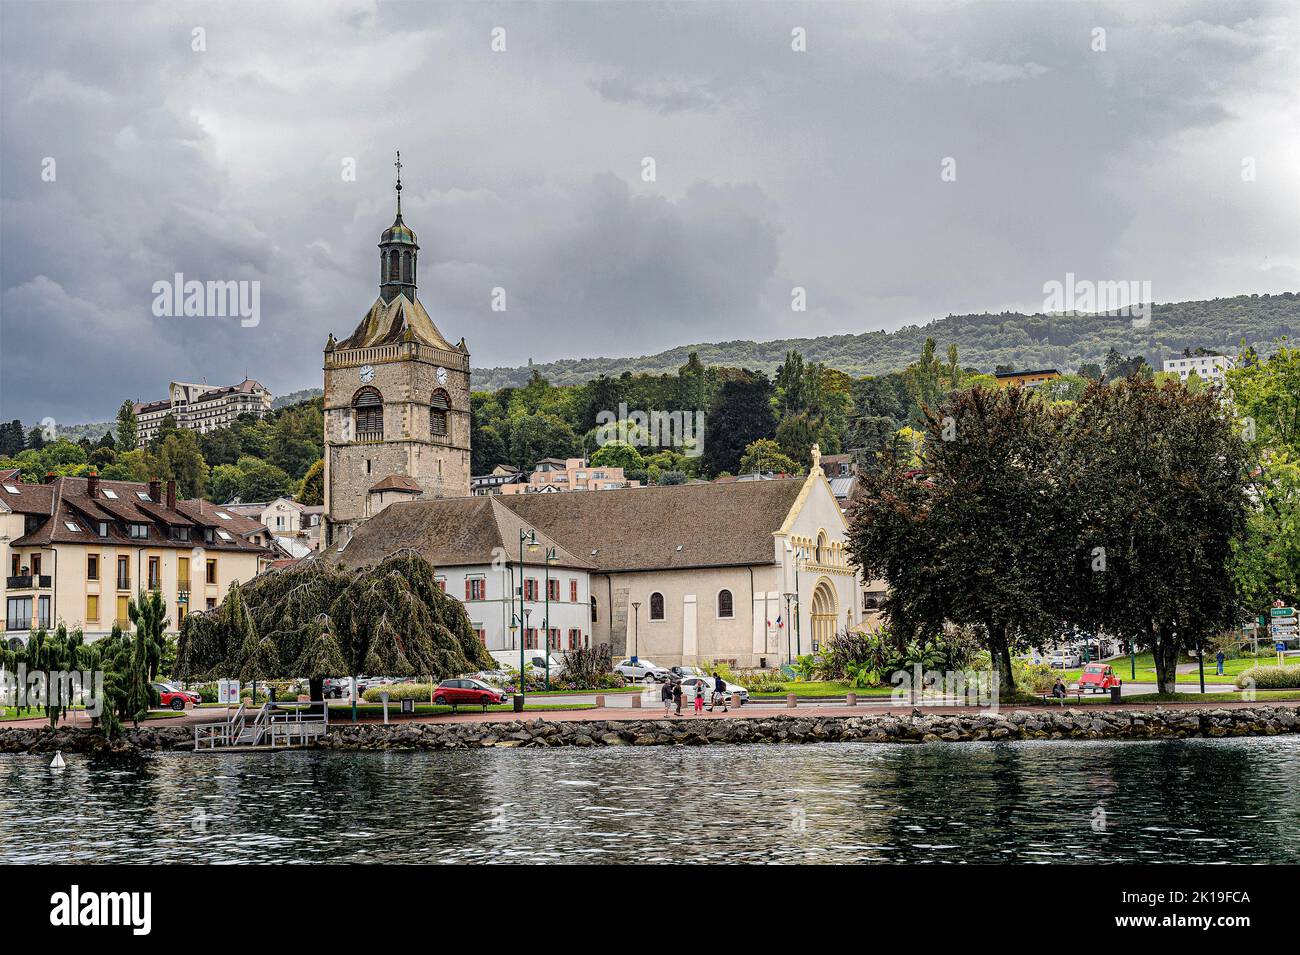 The church 'Notre-Dame-de-l'Assomption' dates from the 13th century. Seen from a boat on the lake. This elegant church has been restored several times. Stock Photo